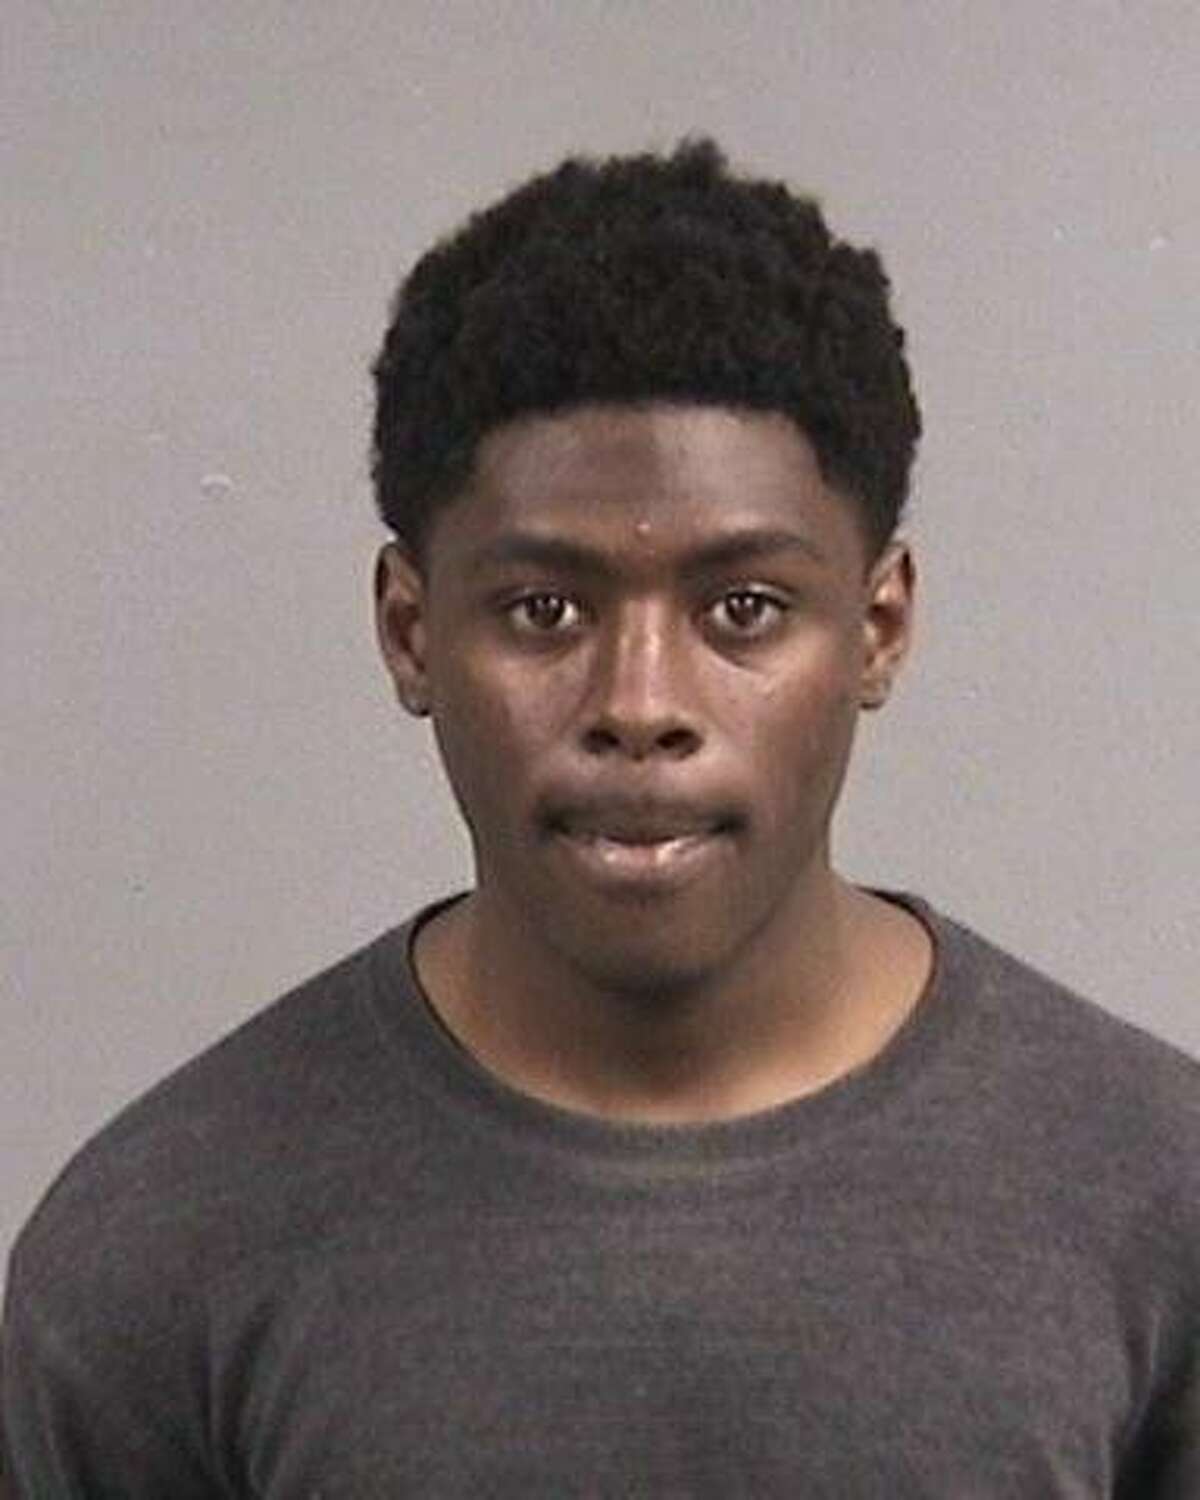 Jujuan Despanie was booked in Santa Rita Jail and charged with felony counts of robbery and abuse against a dependent adult along with a misdemeanor count of resisting arrest after allegedly robbing a blind woman of her cell phone.